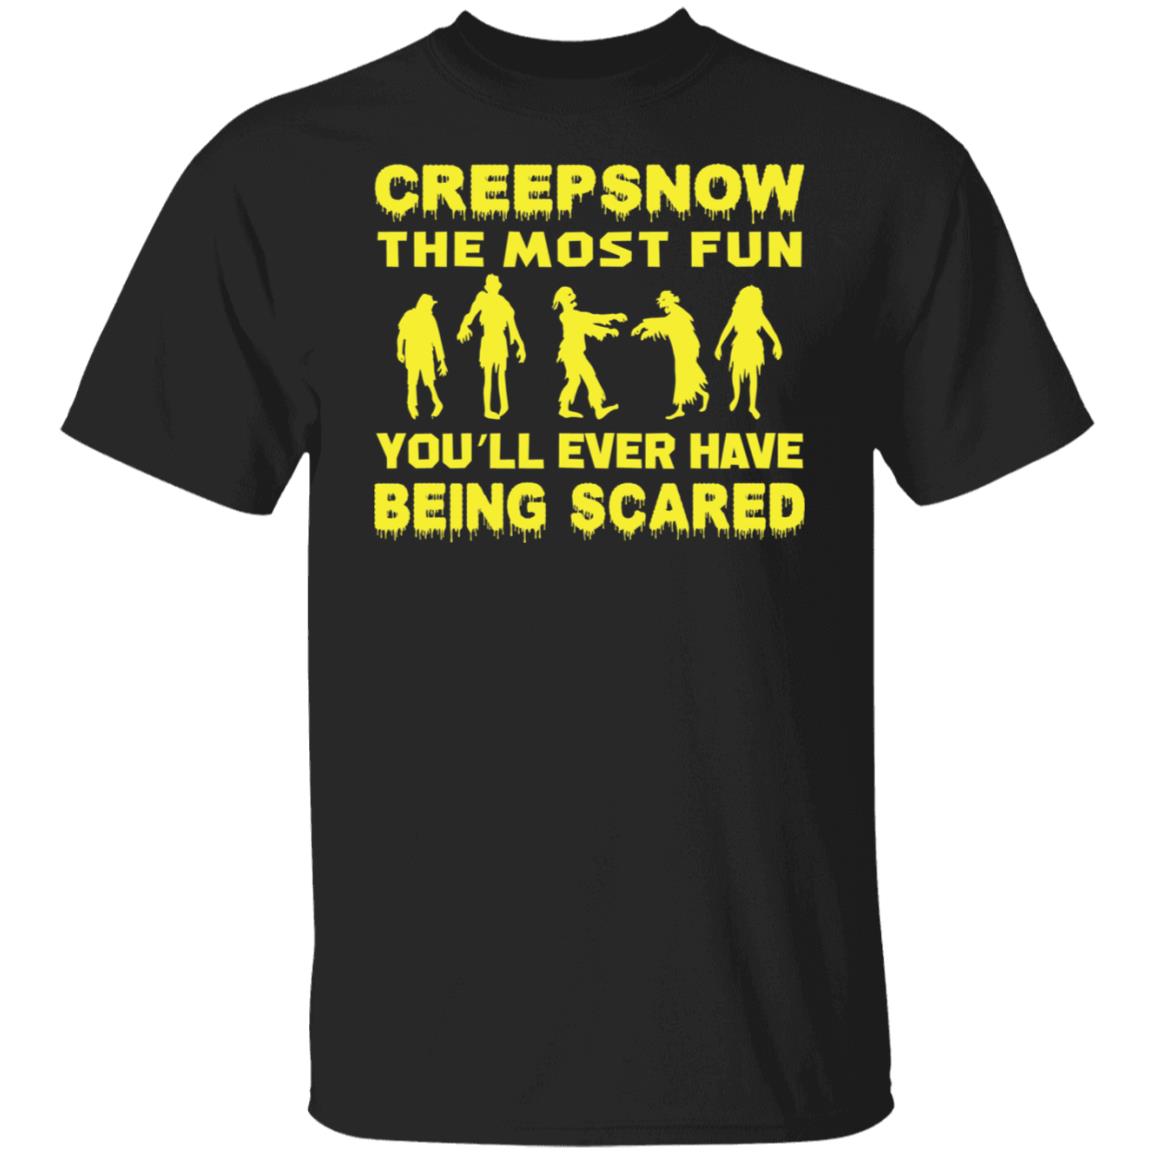 Creepsnow The Most Fun You'll Ever Have Being Scared Funny Halloween Shirt